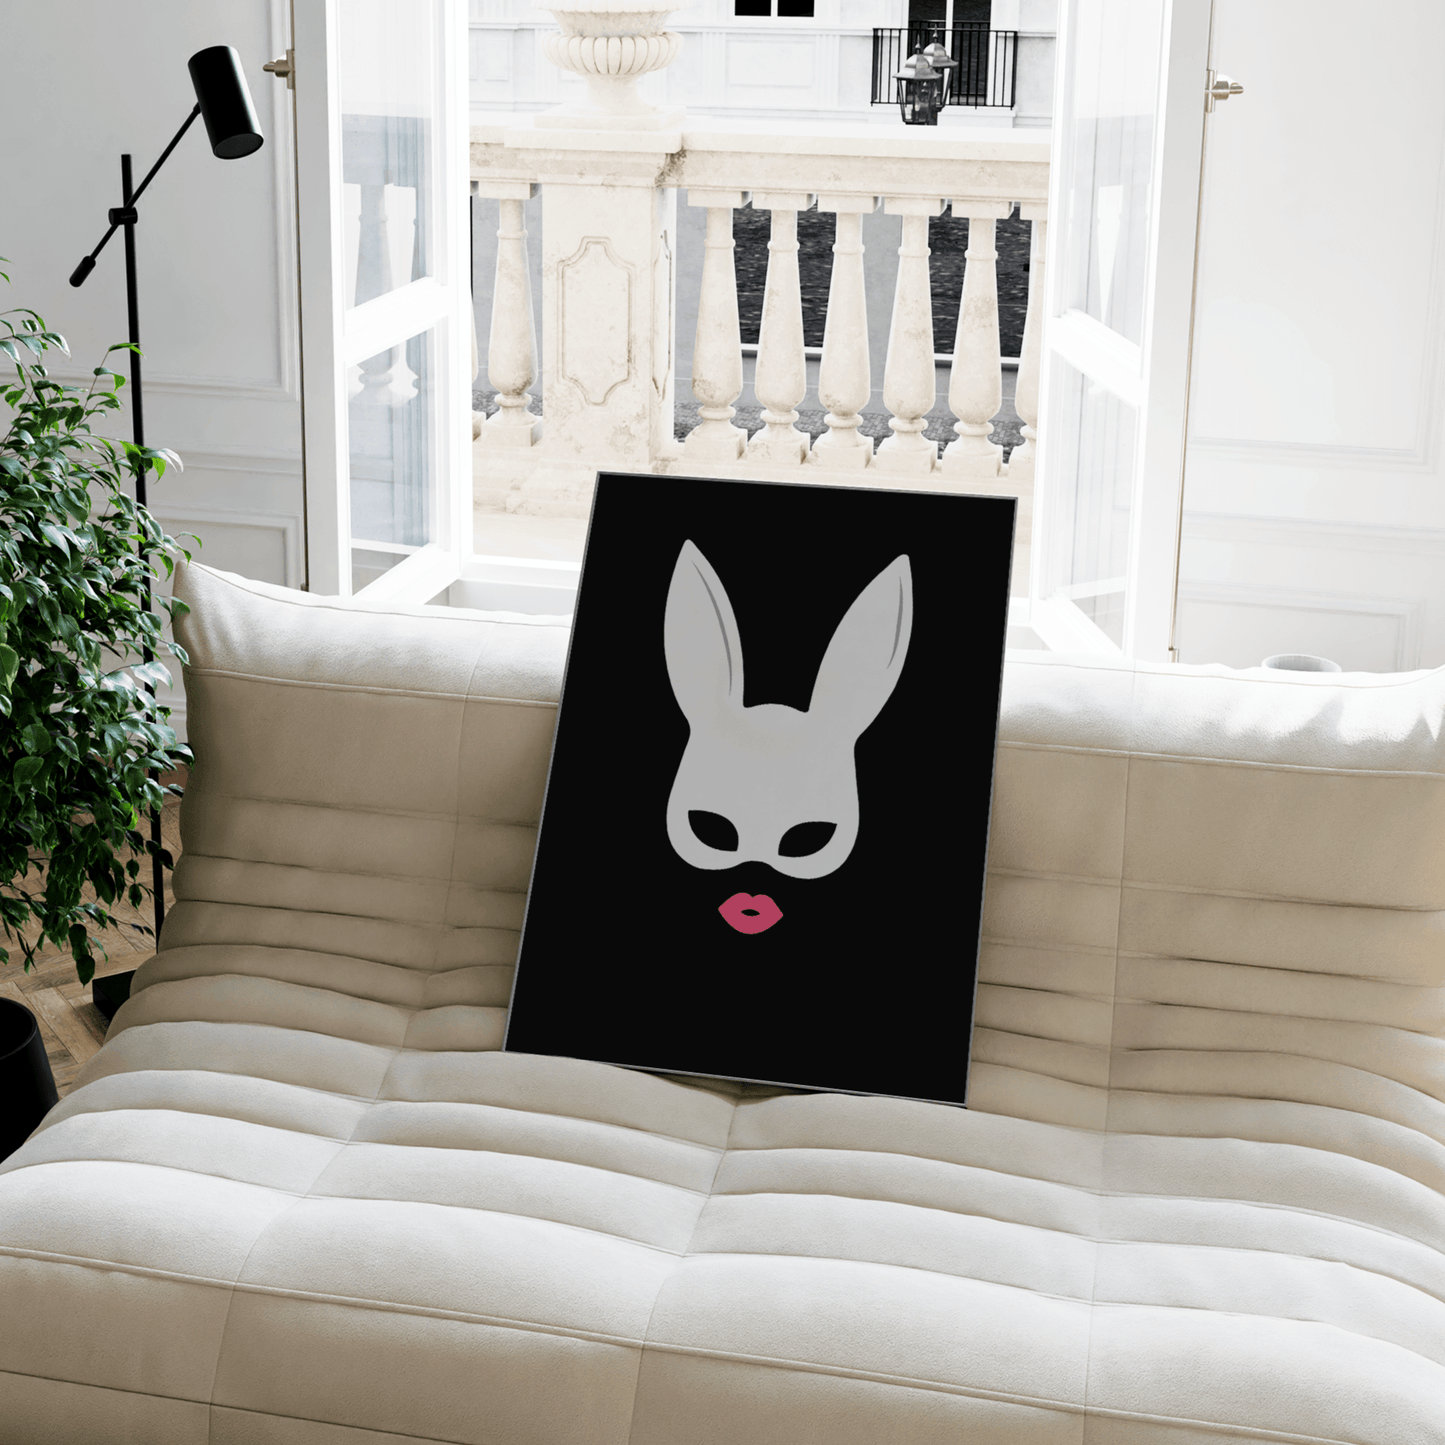 Follow The White Rabbit, Poster - THE WALL SNOB